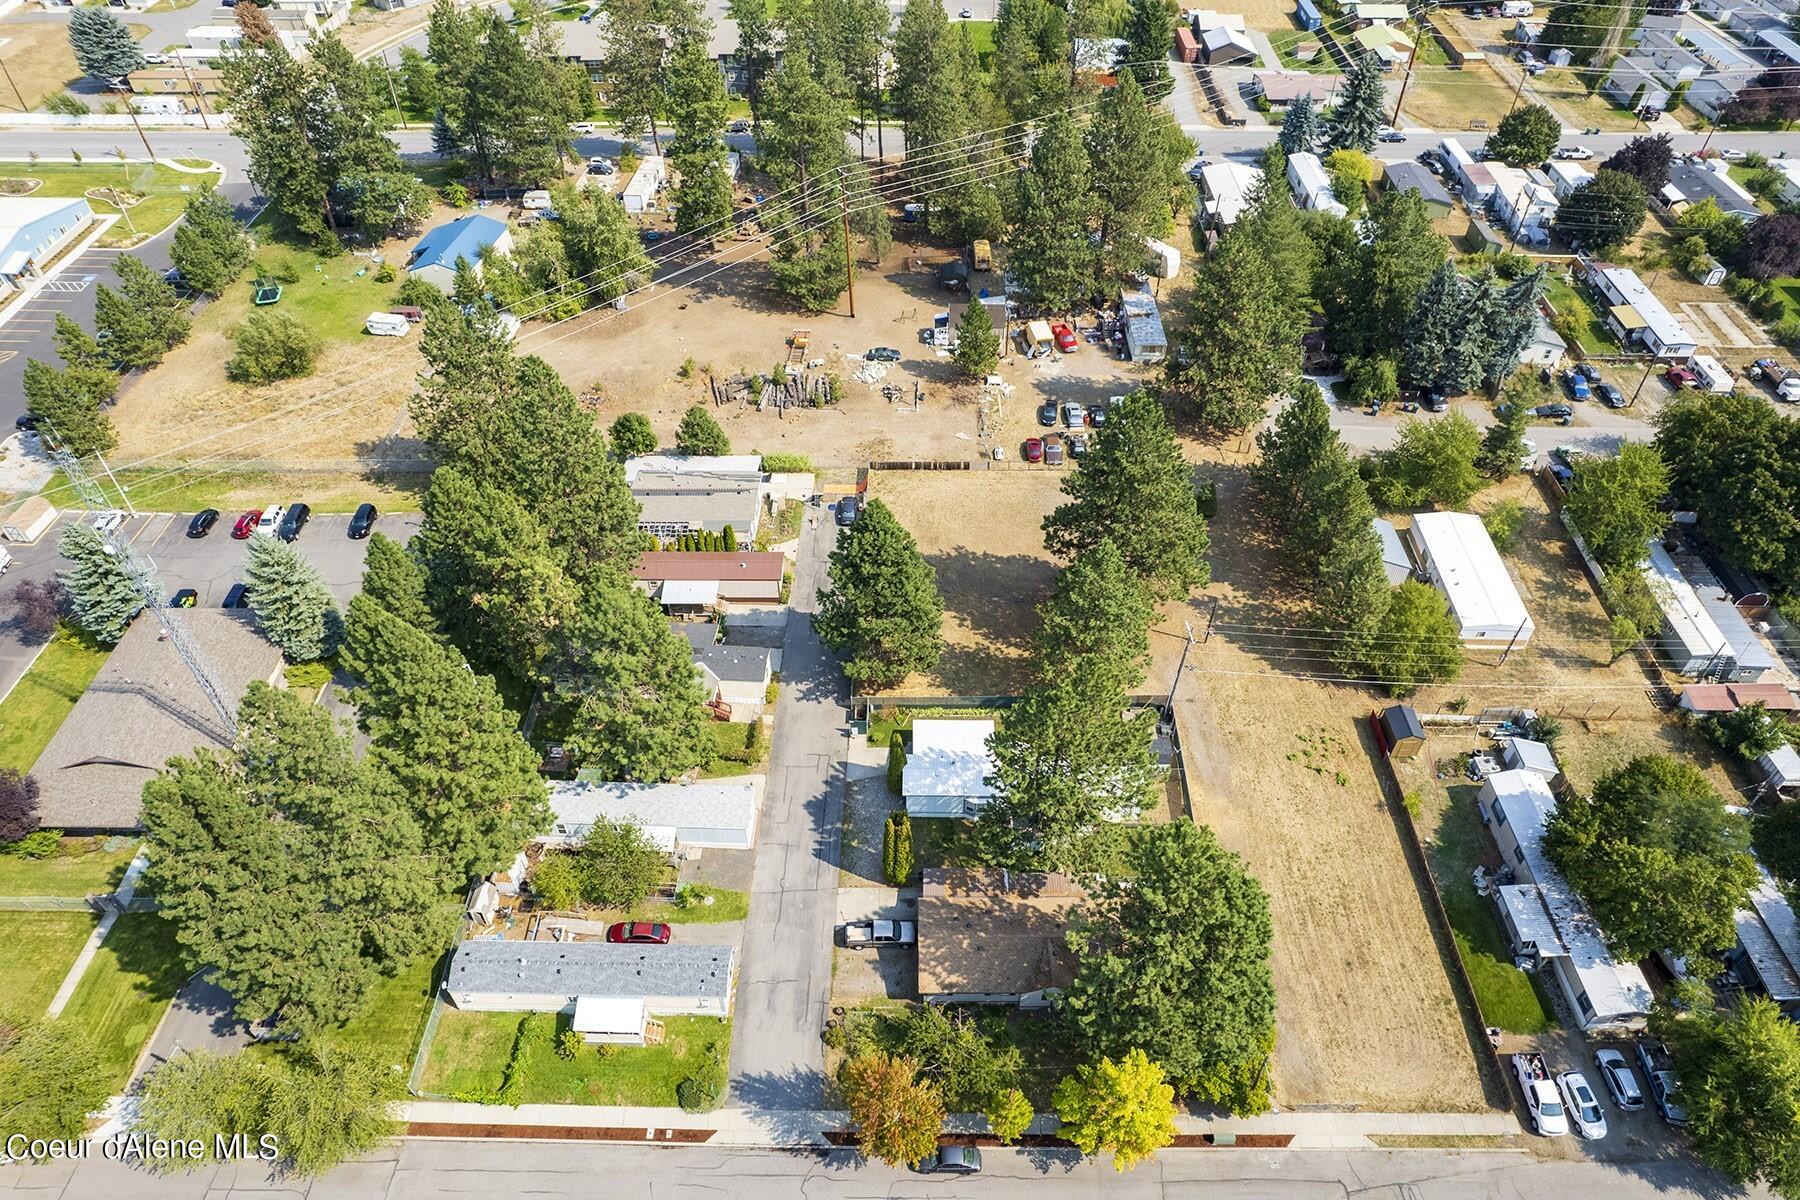 Over View of all of property